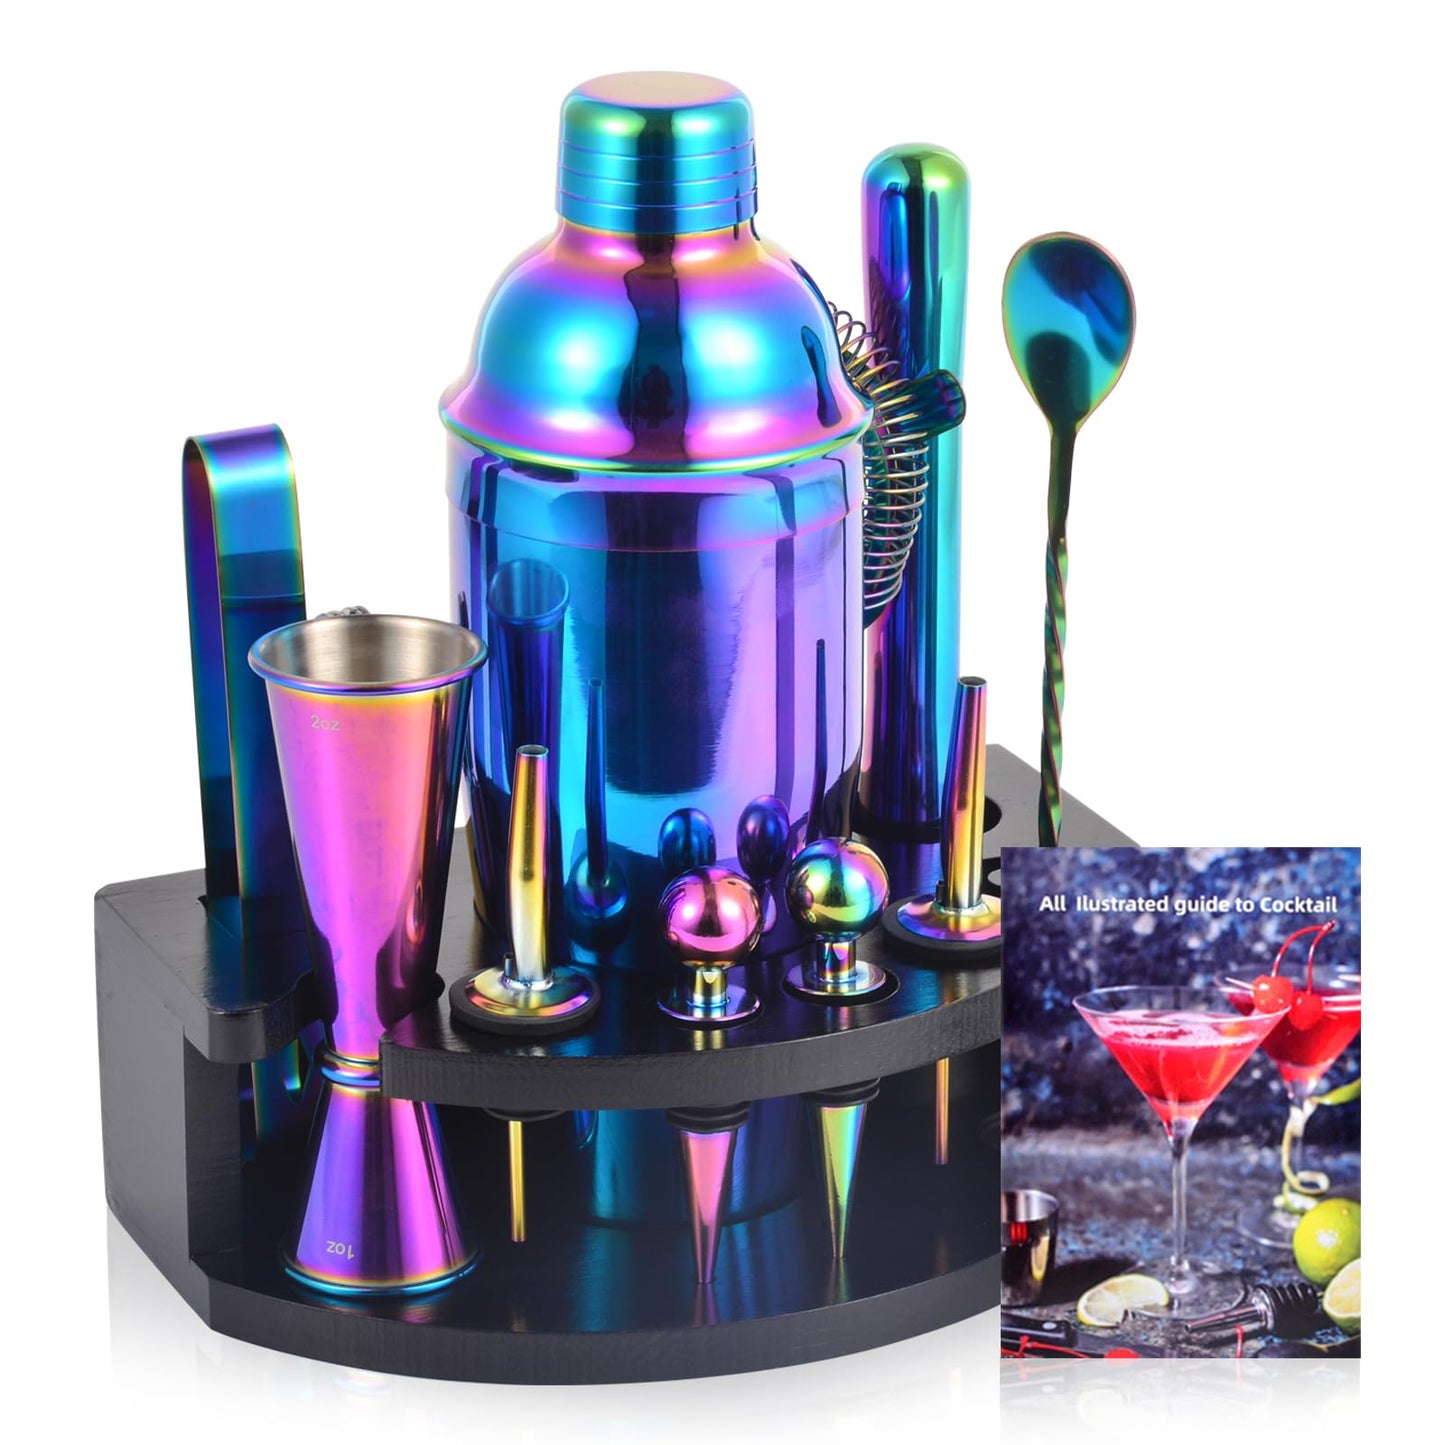 Safring Bartender Kit with Stand, 12-Piece Bar Set | 24oz Cocktail Shaker Set for Drink Mixing, Martini Shaker Set with Bar Tools, Recipes Booklet | Fun Housewarming Gift (Rainbow)